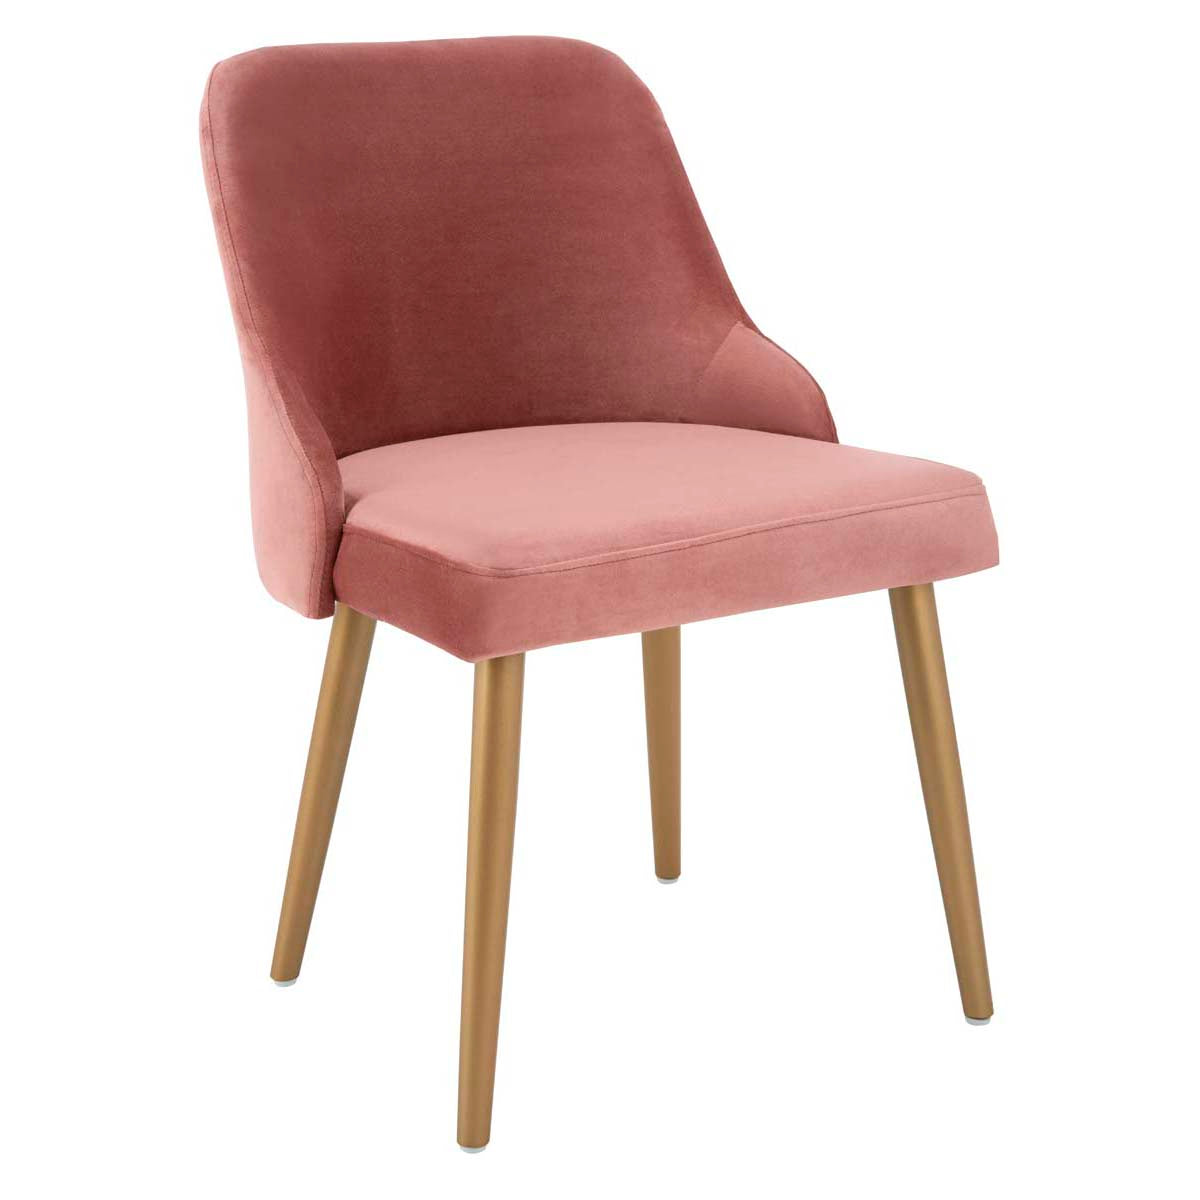 Safavieh Lulu Upholstered Dining Chair, DCH6200